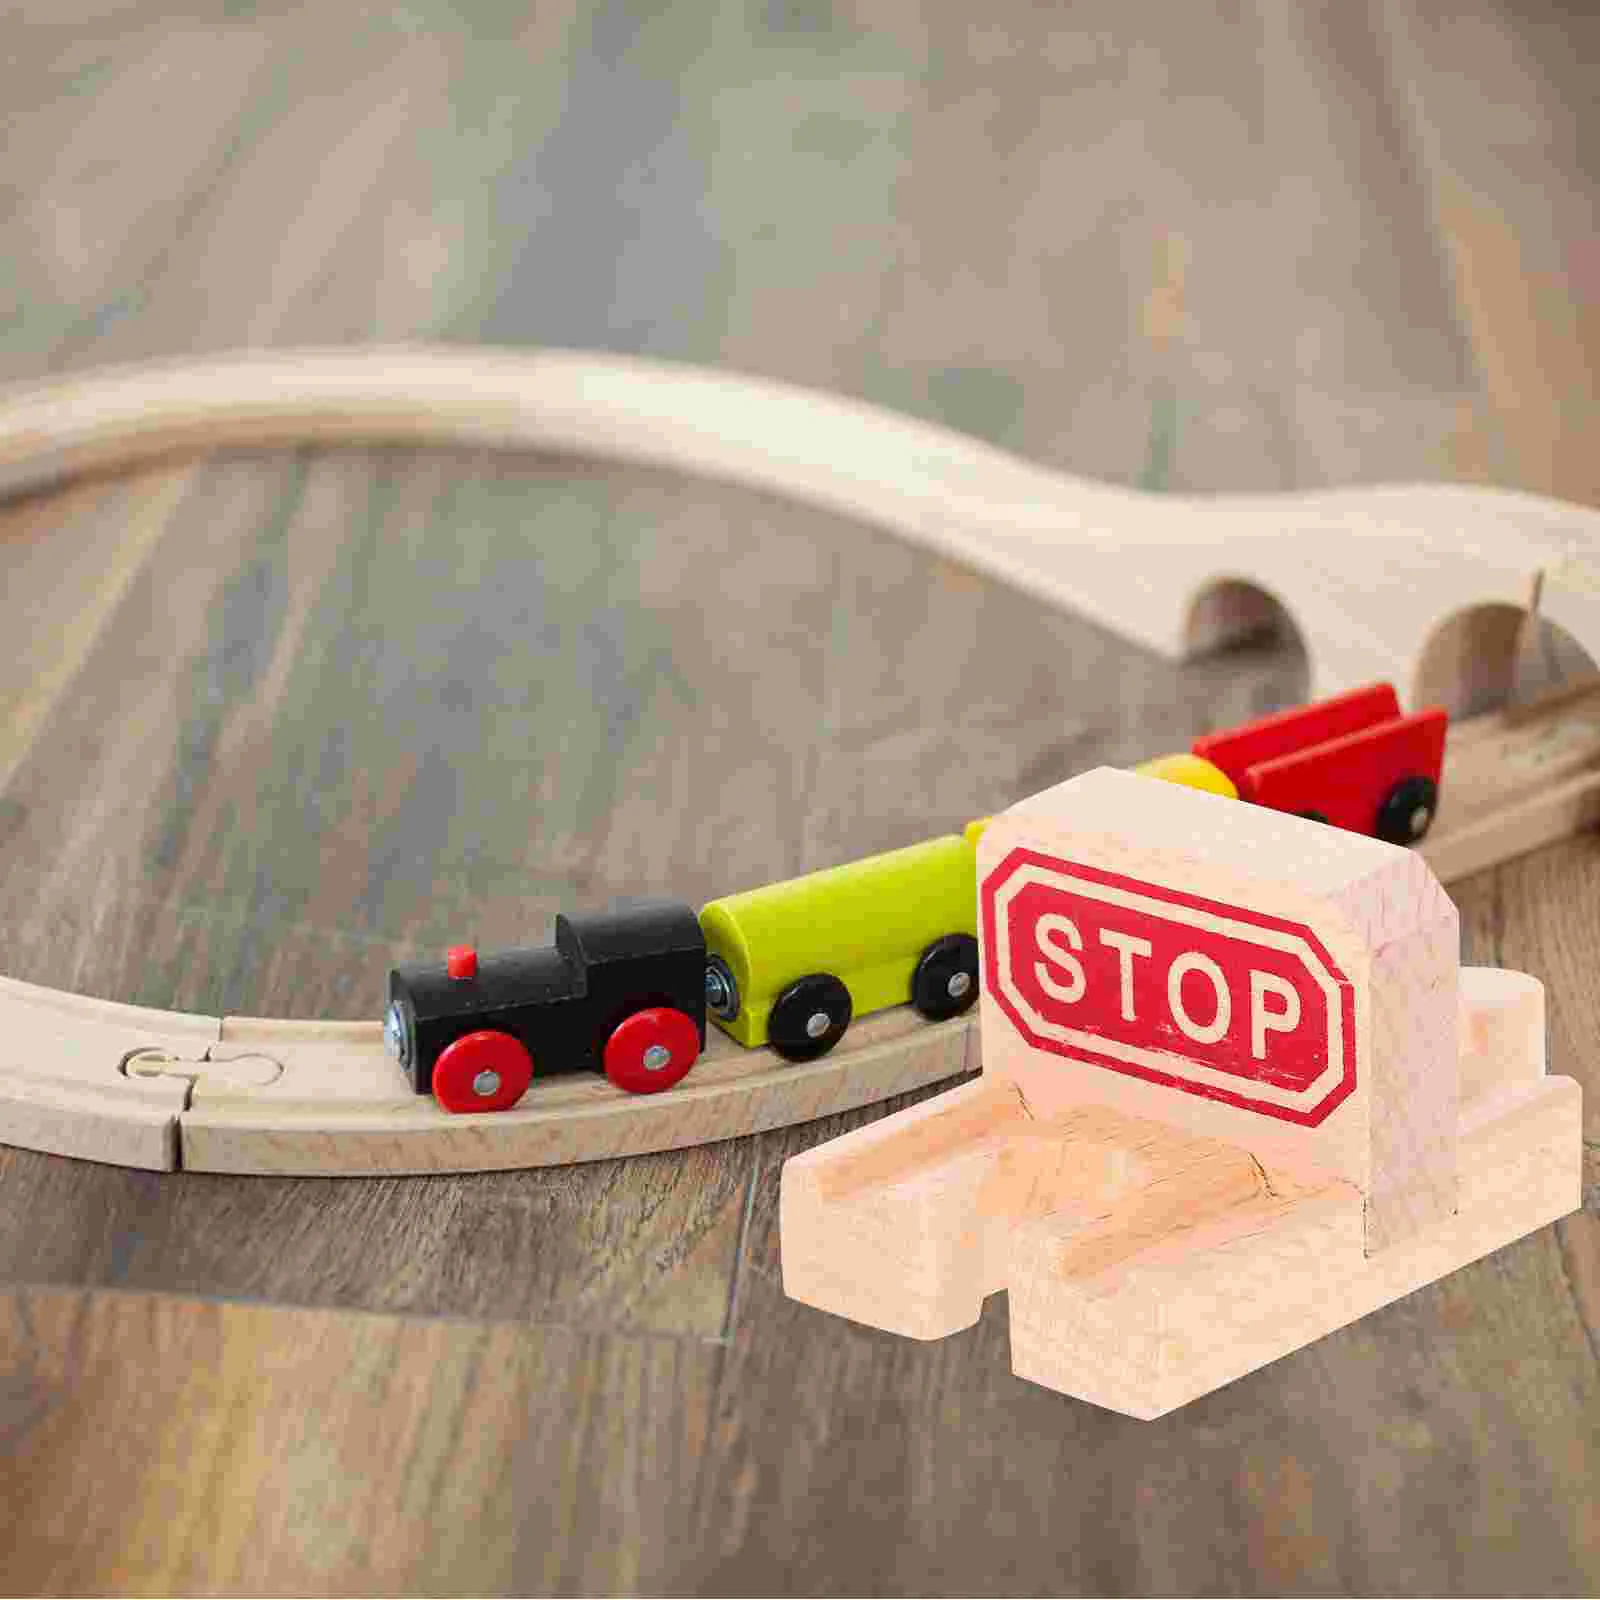 2Pcs Wooden Train Track Toy Railway Expansion Stop Track Train Toy Accessory